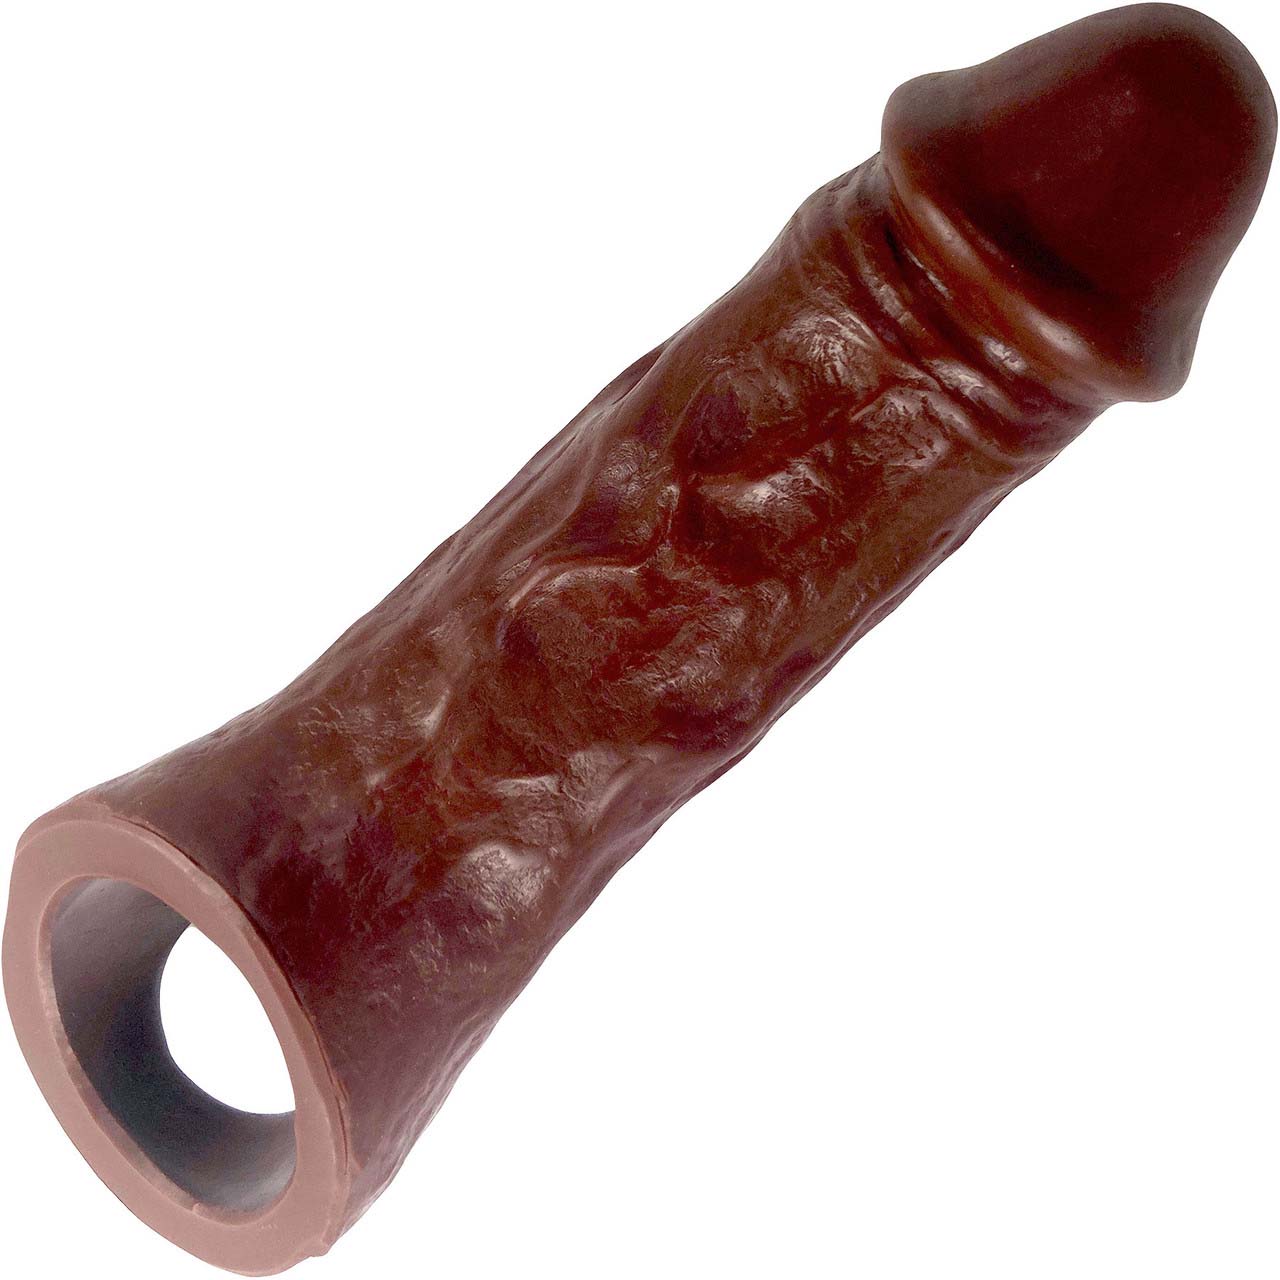 The front of the chocolate Colossus Vixskin Extender Dildo.